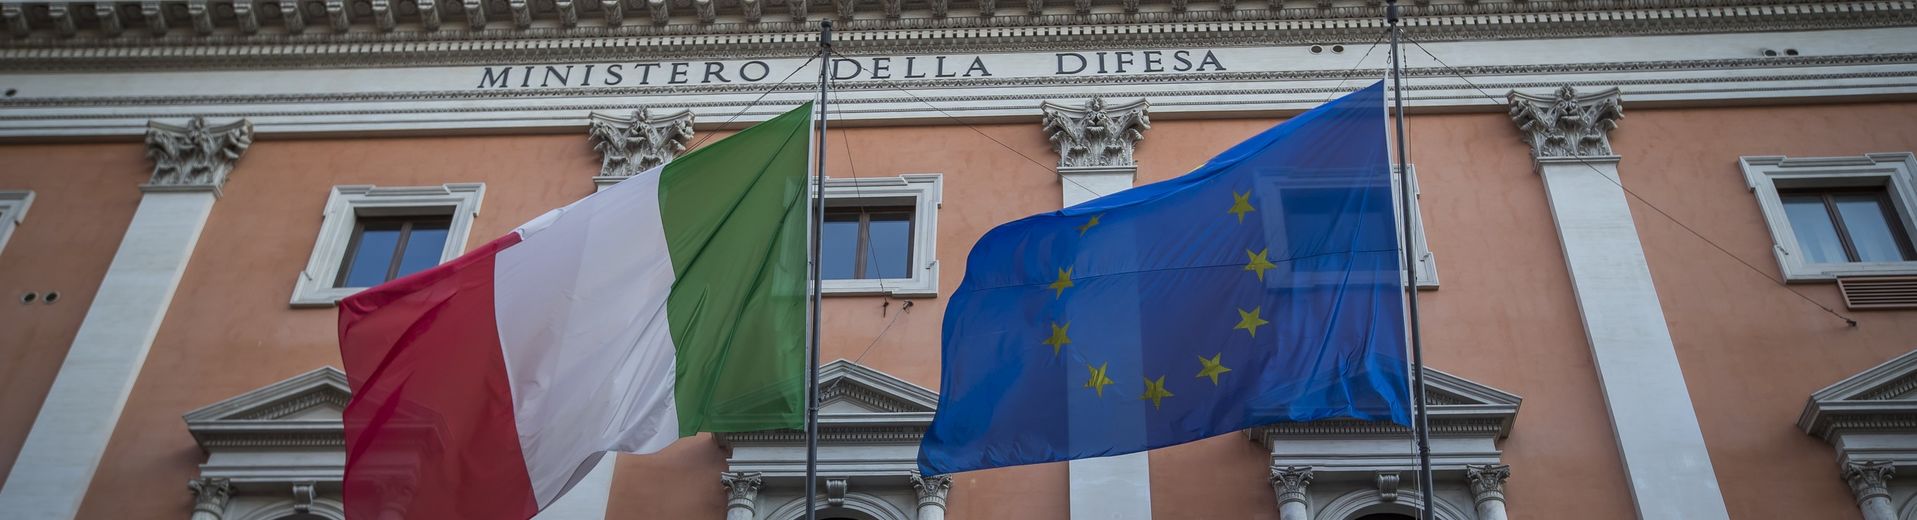 The Italian flag waves in front of a historic building in Rome.